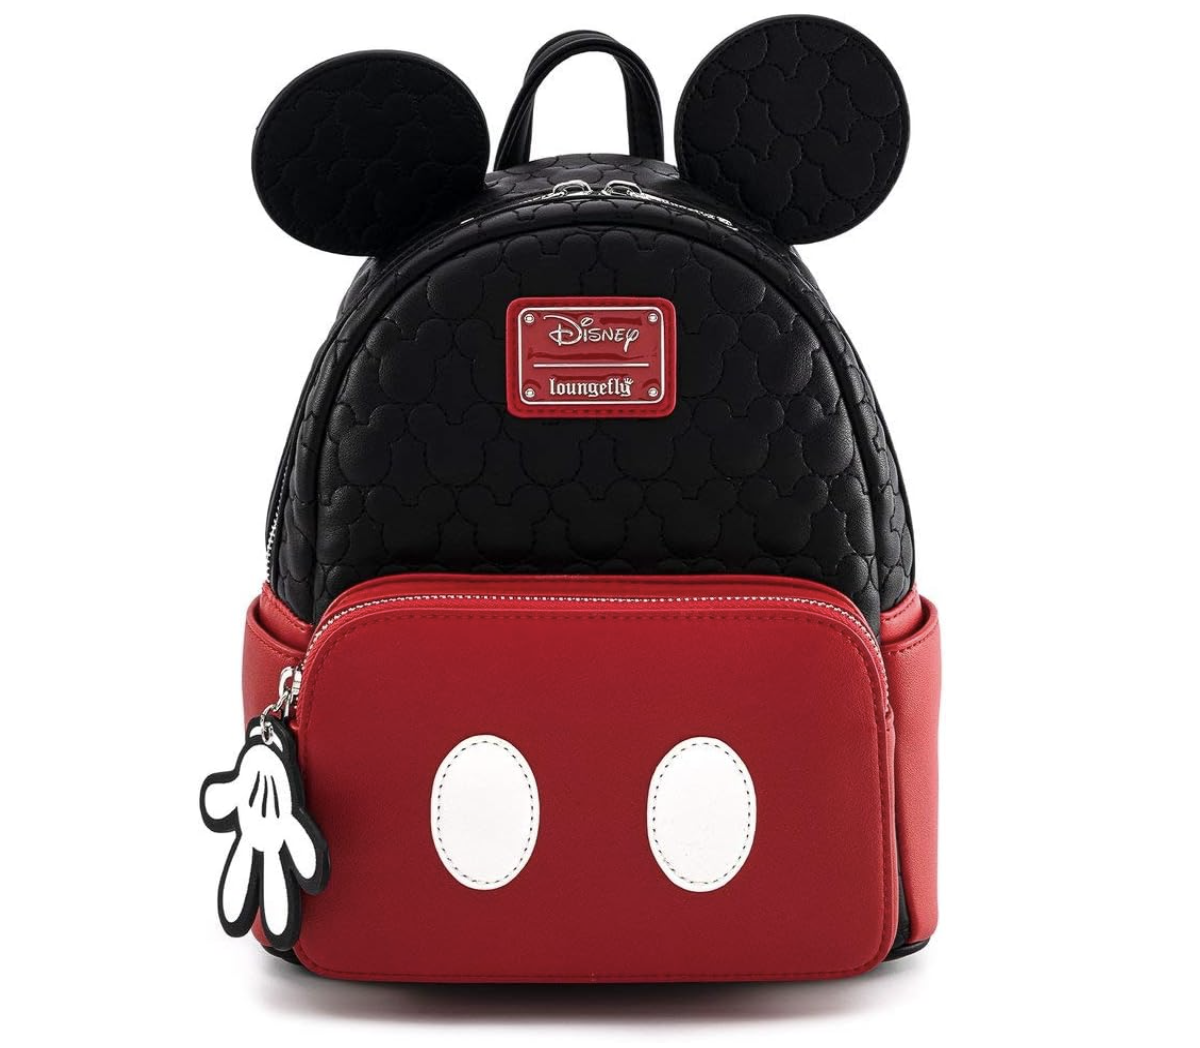 9 Disney Loungefly Bags on Amazon That Will Arrive In Time for ...